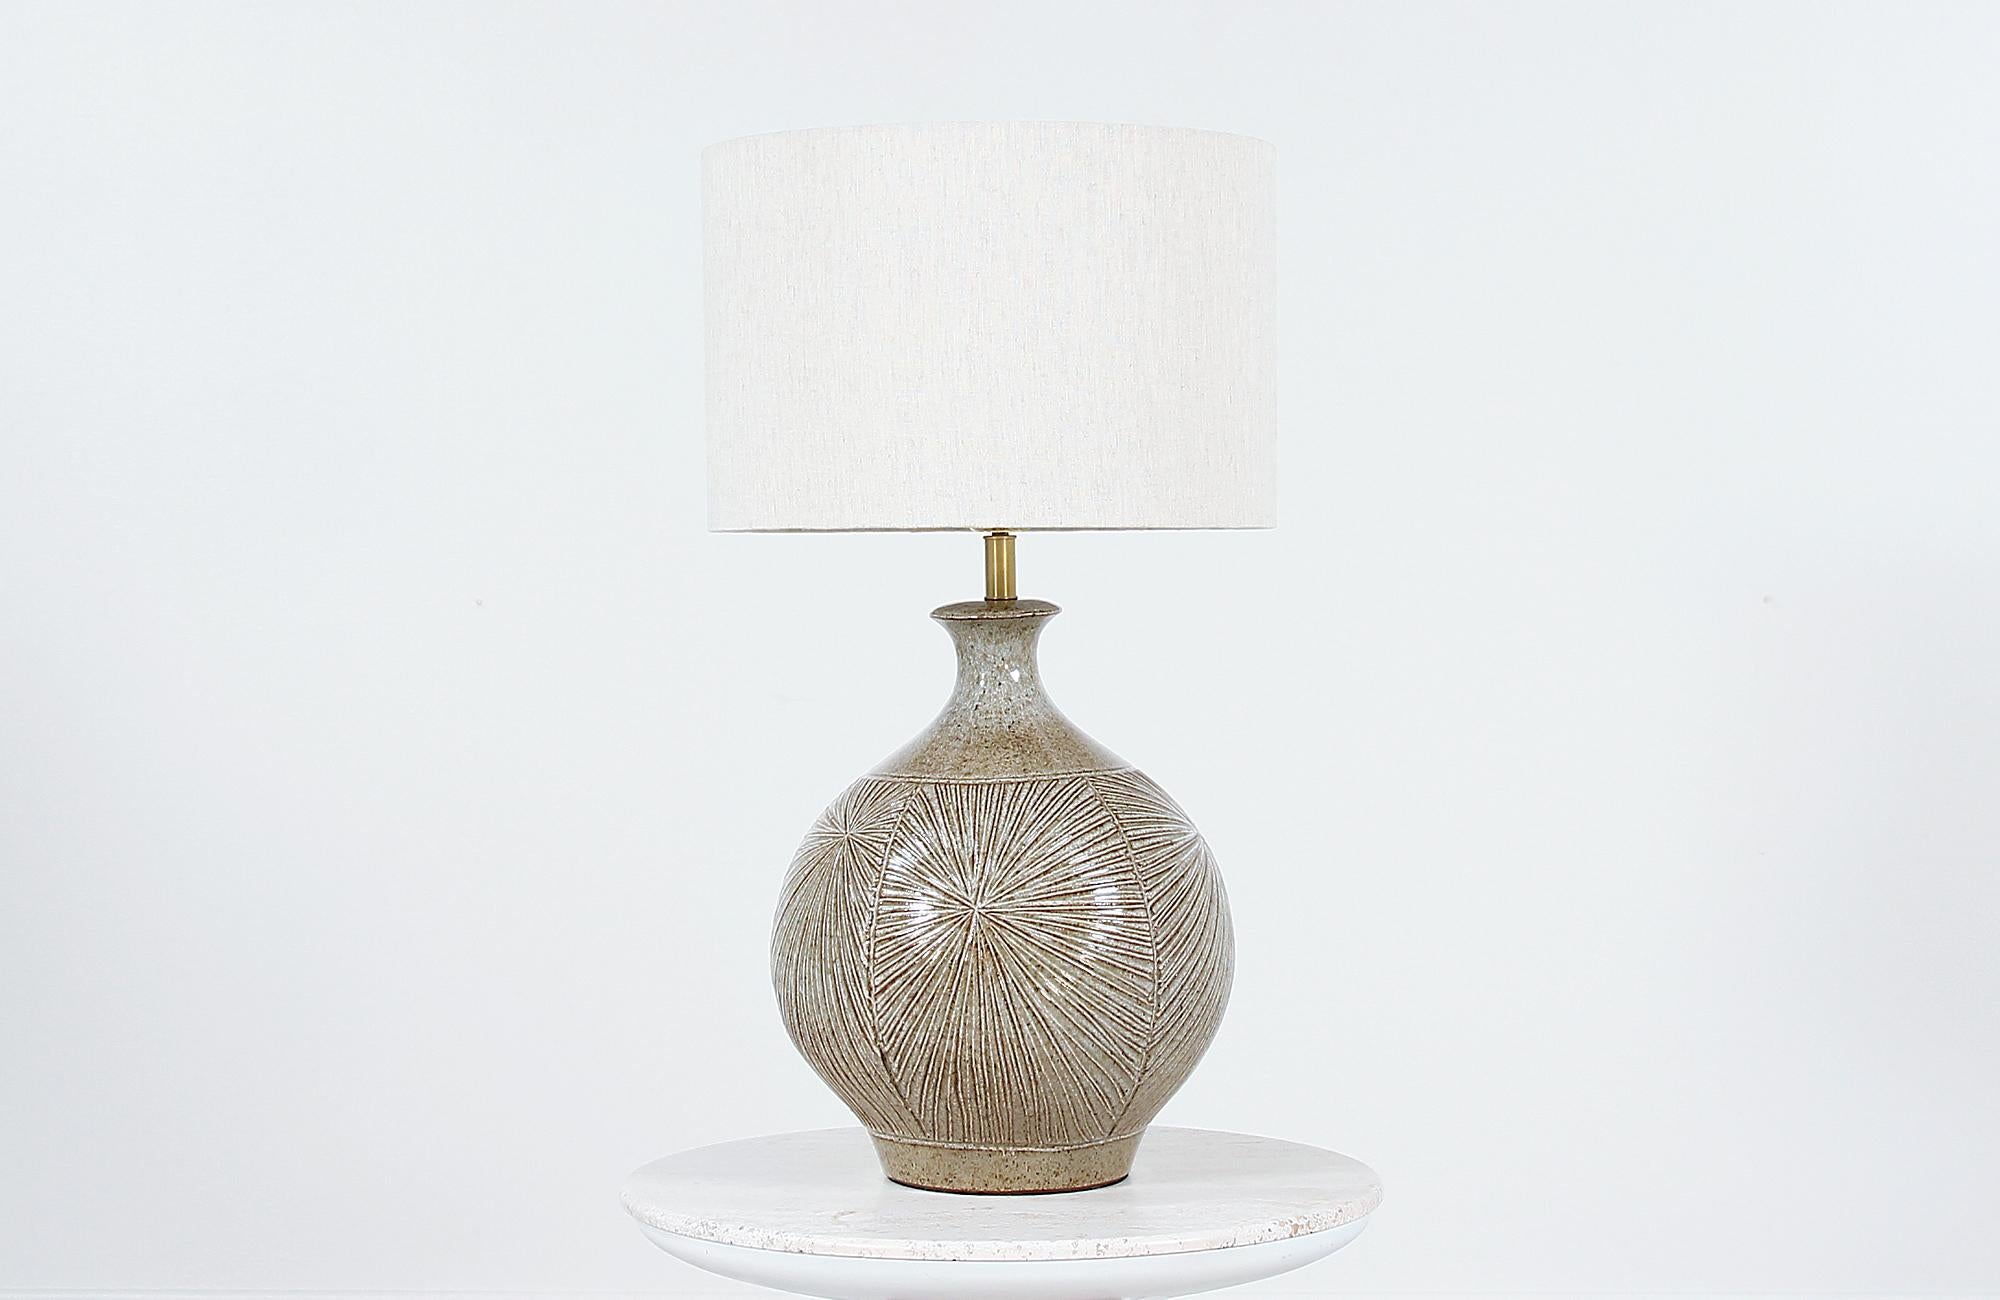 American David Cressey & Robert Maxwell Ceramic Table Lamp for Architectural Pottery